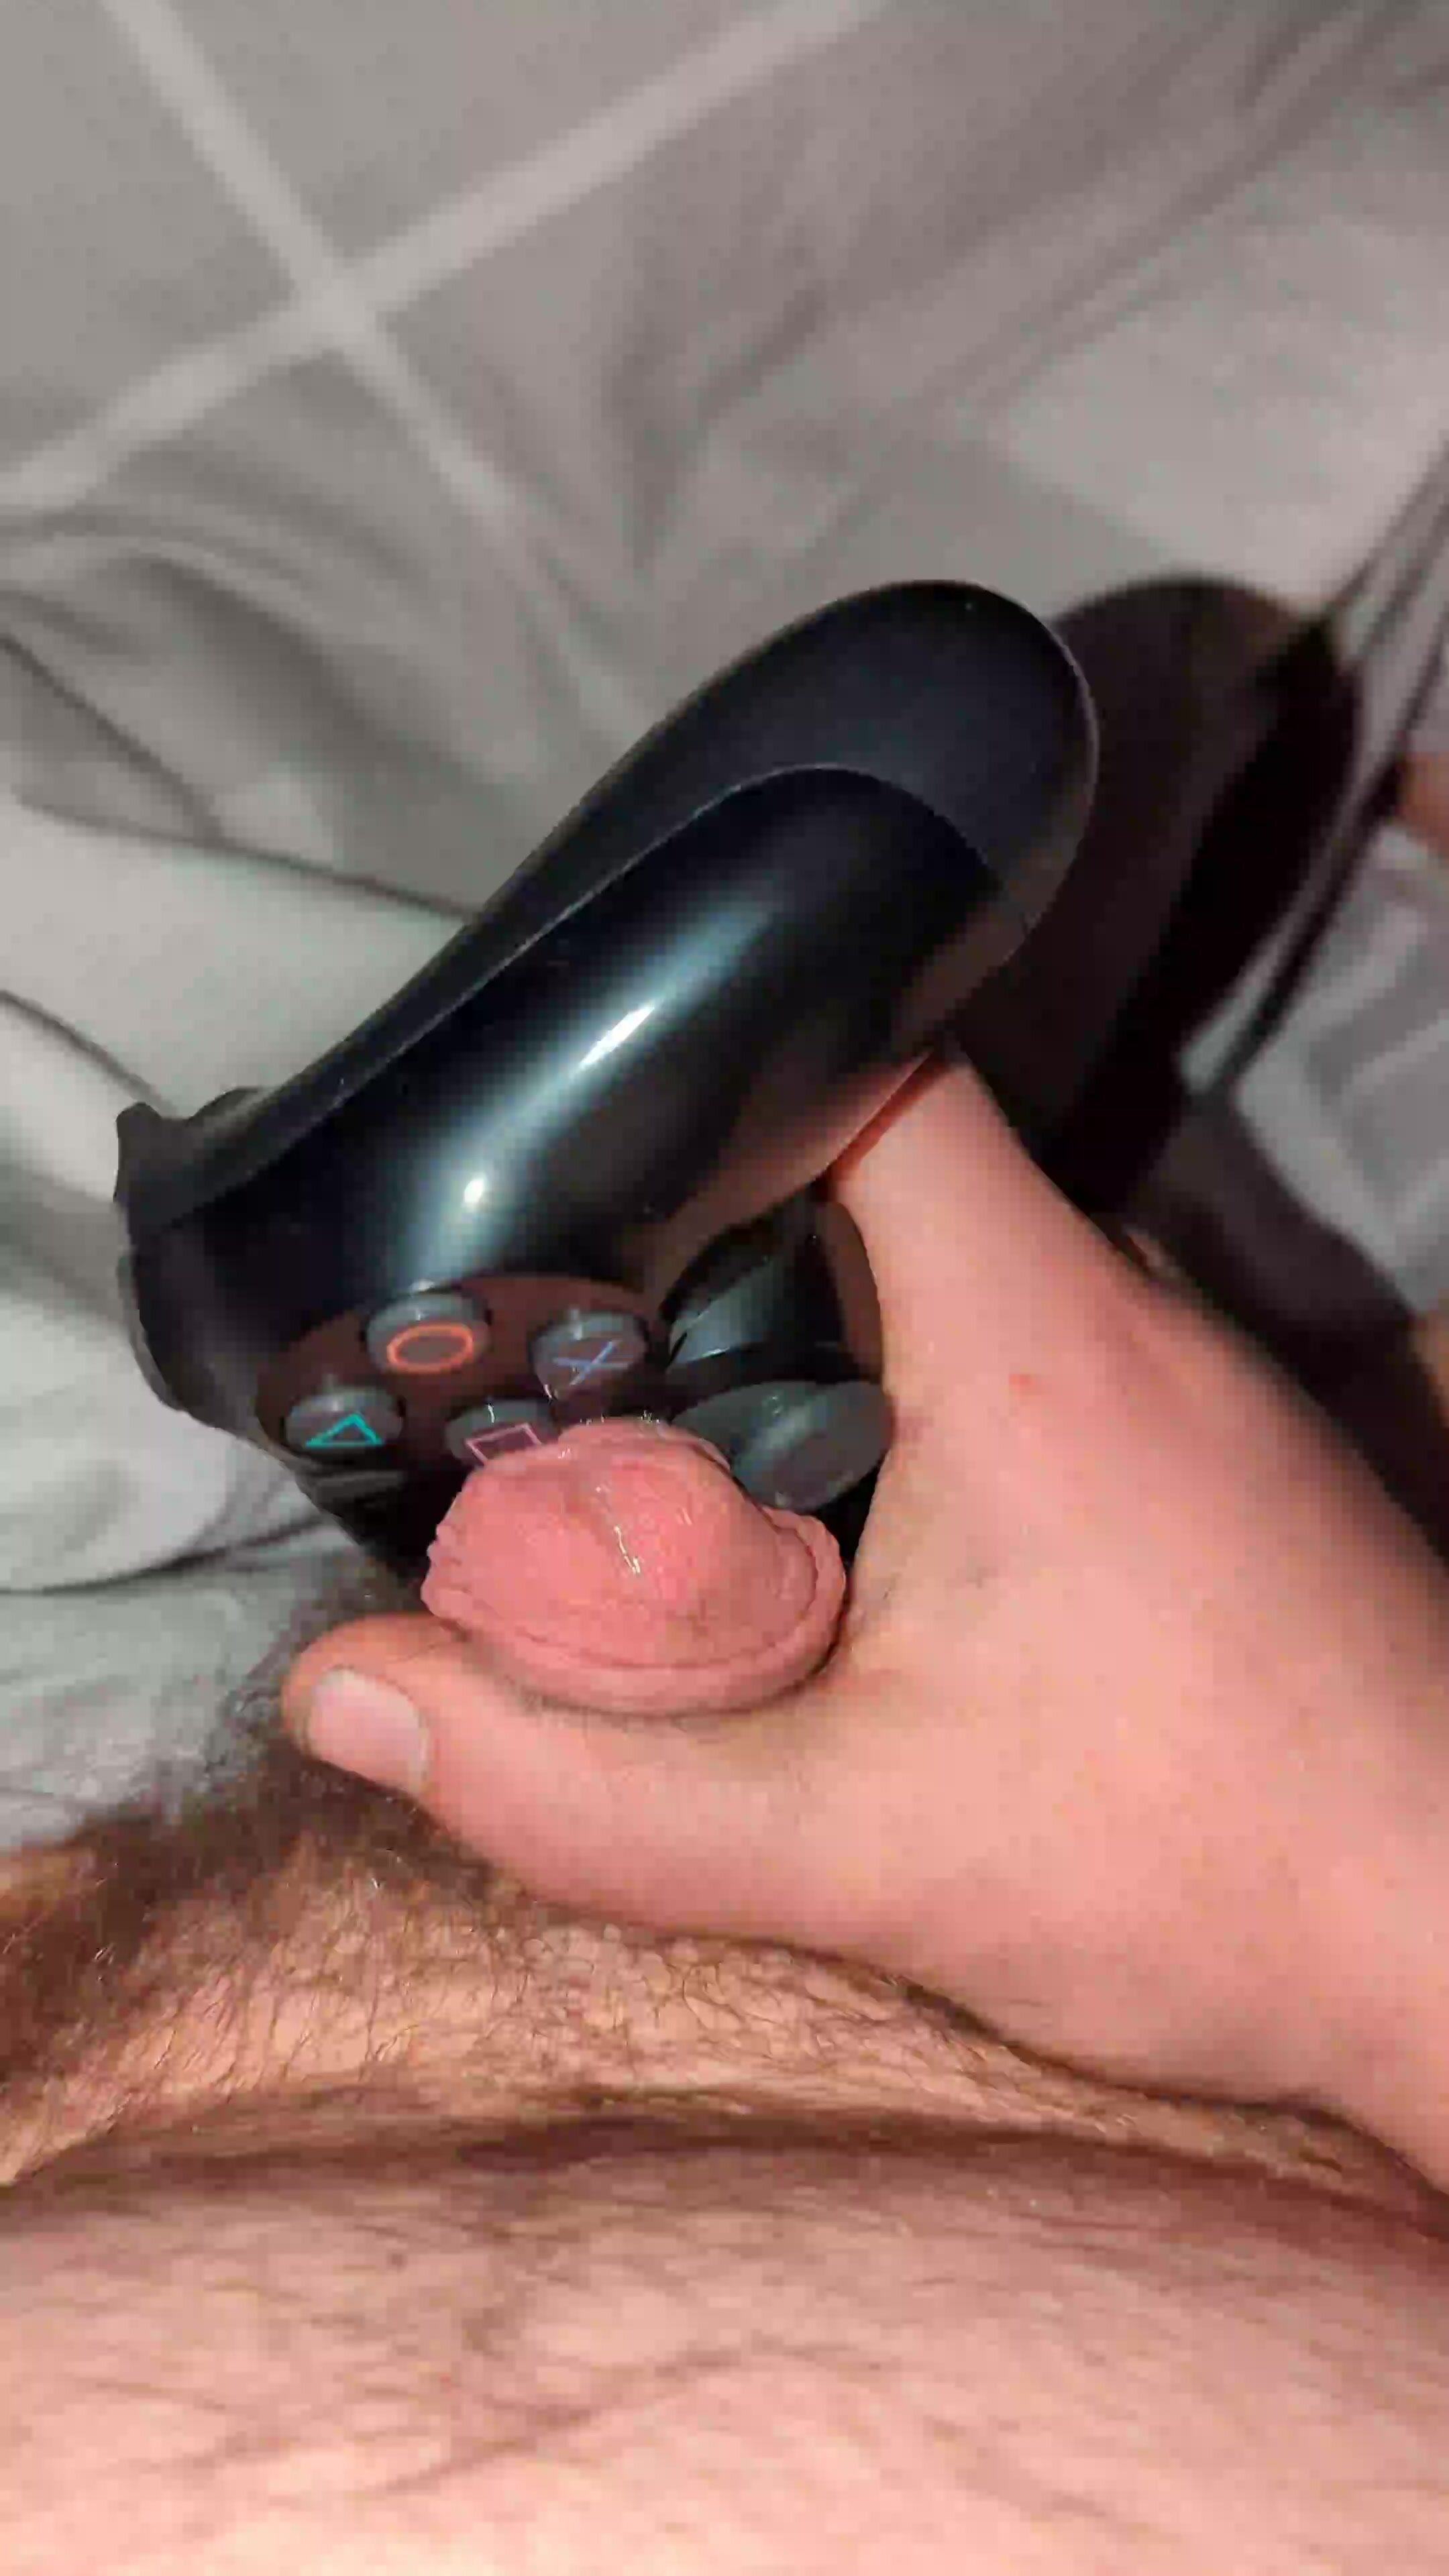 Cumming on PS4 Controller